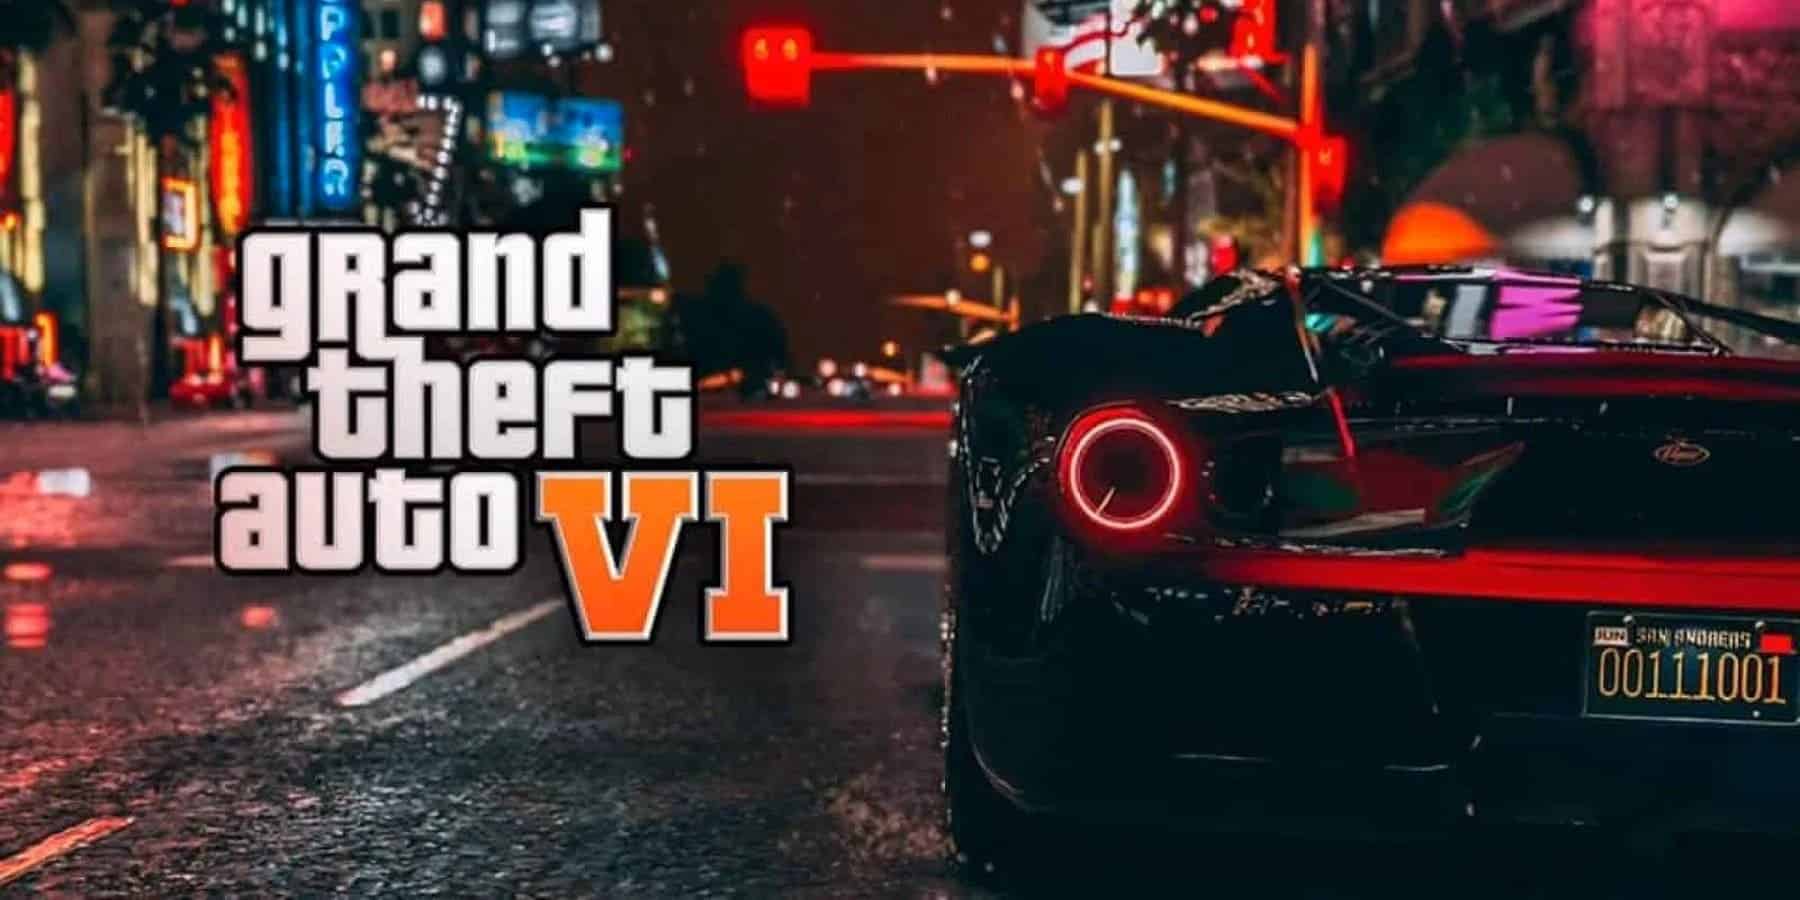 GTA VI Storyline, Release Date, Protagonists, Map, And More